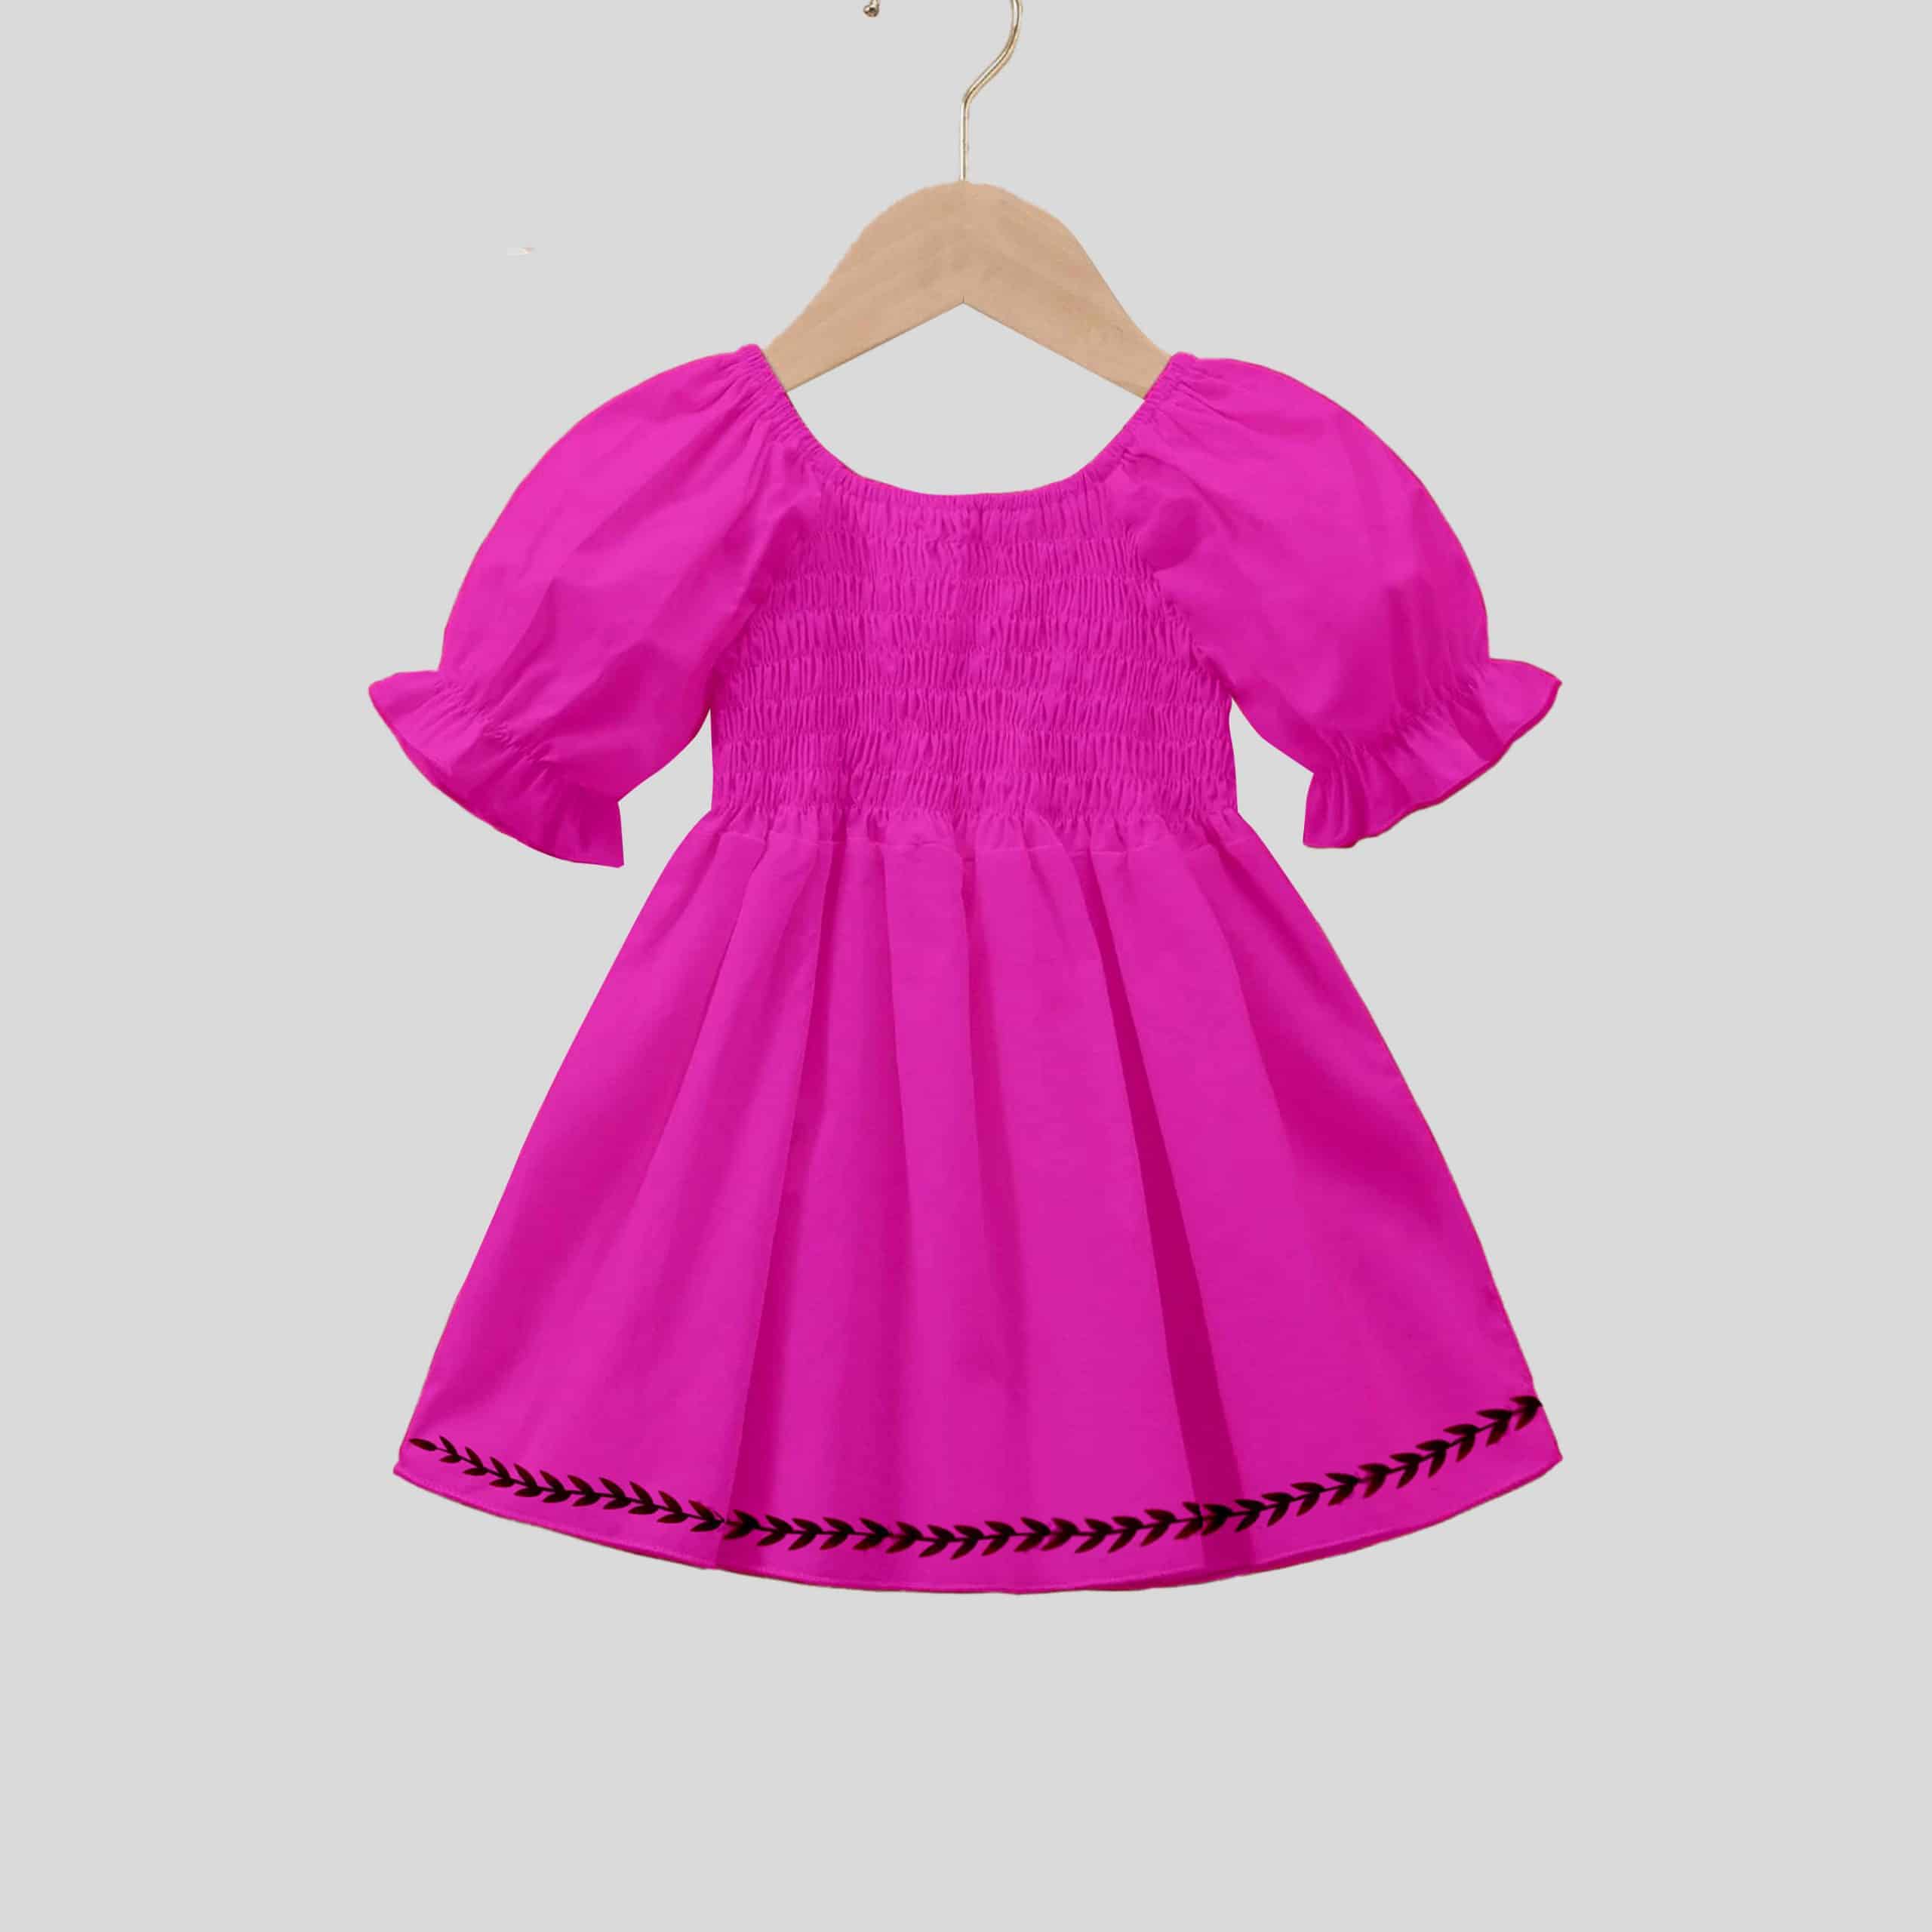 Girls wild berry color dress with puff sleeve - RKFCW153